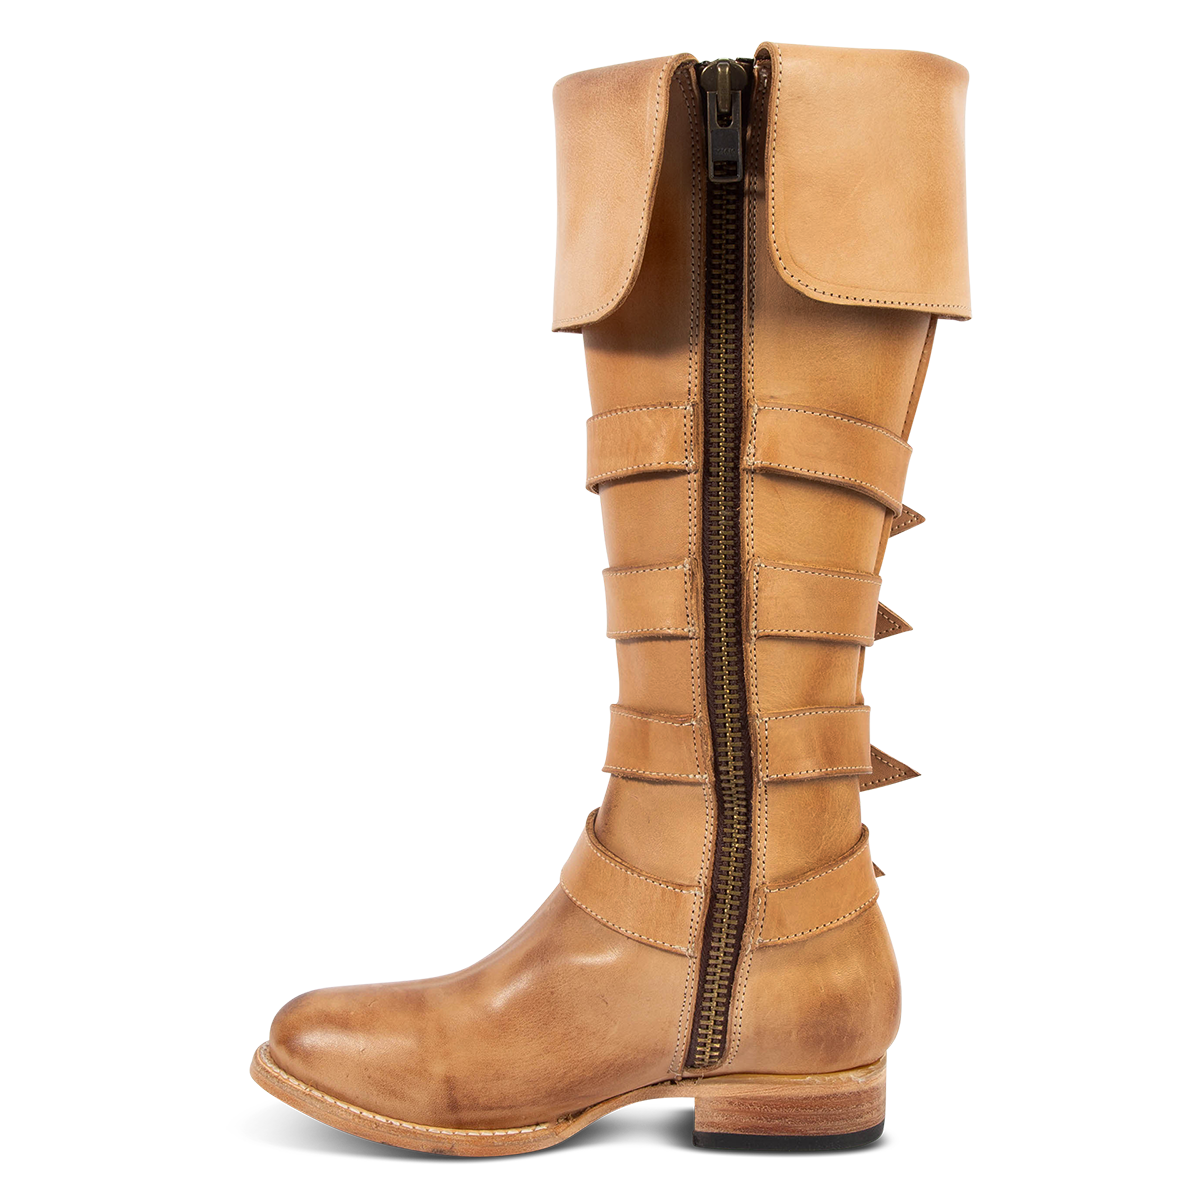 Inside view showing zipper closure and buckle loops with silver hardware on FREEBIRD women's Risky beige fold-over leather boot